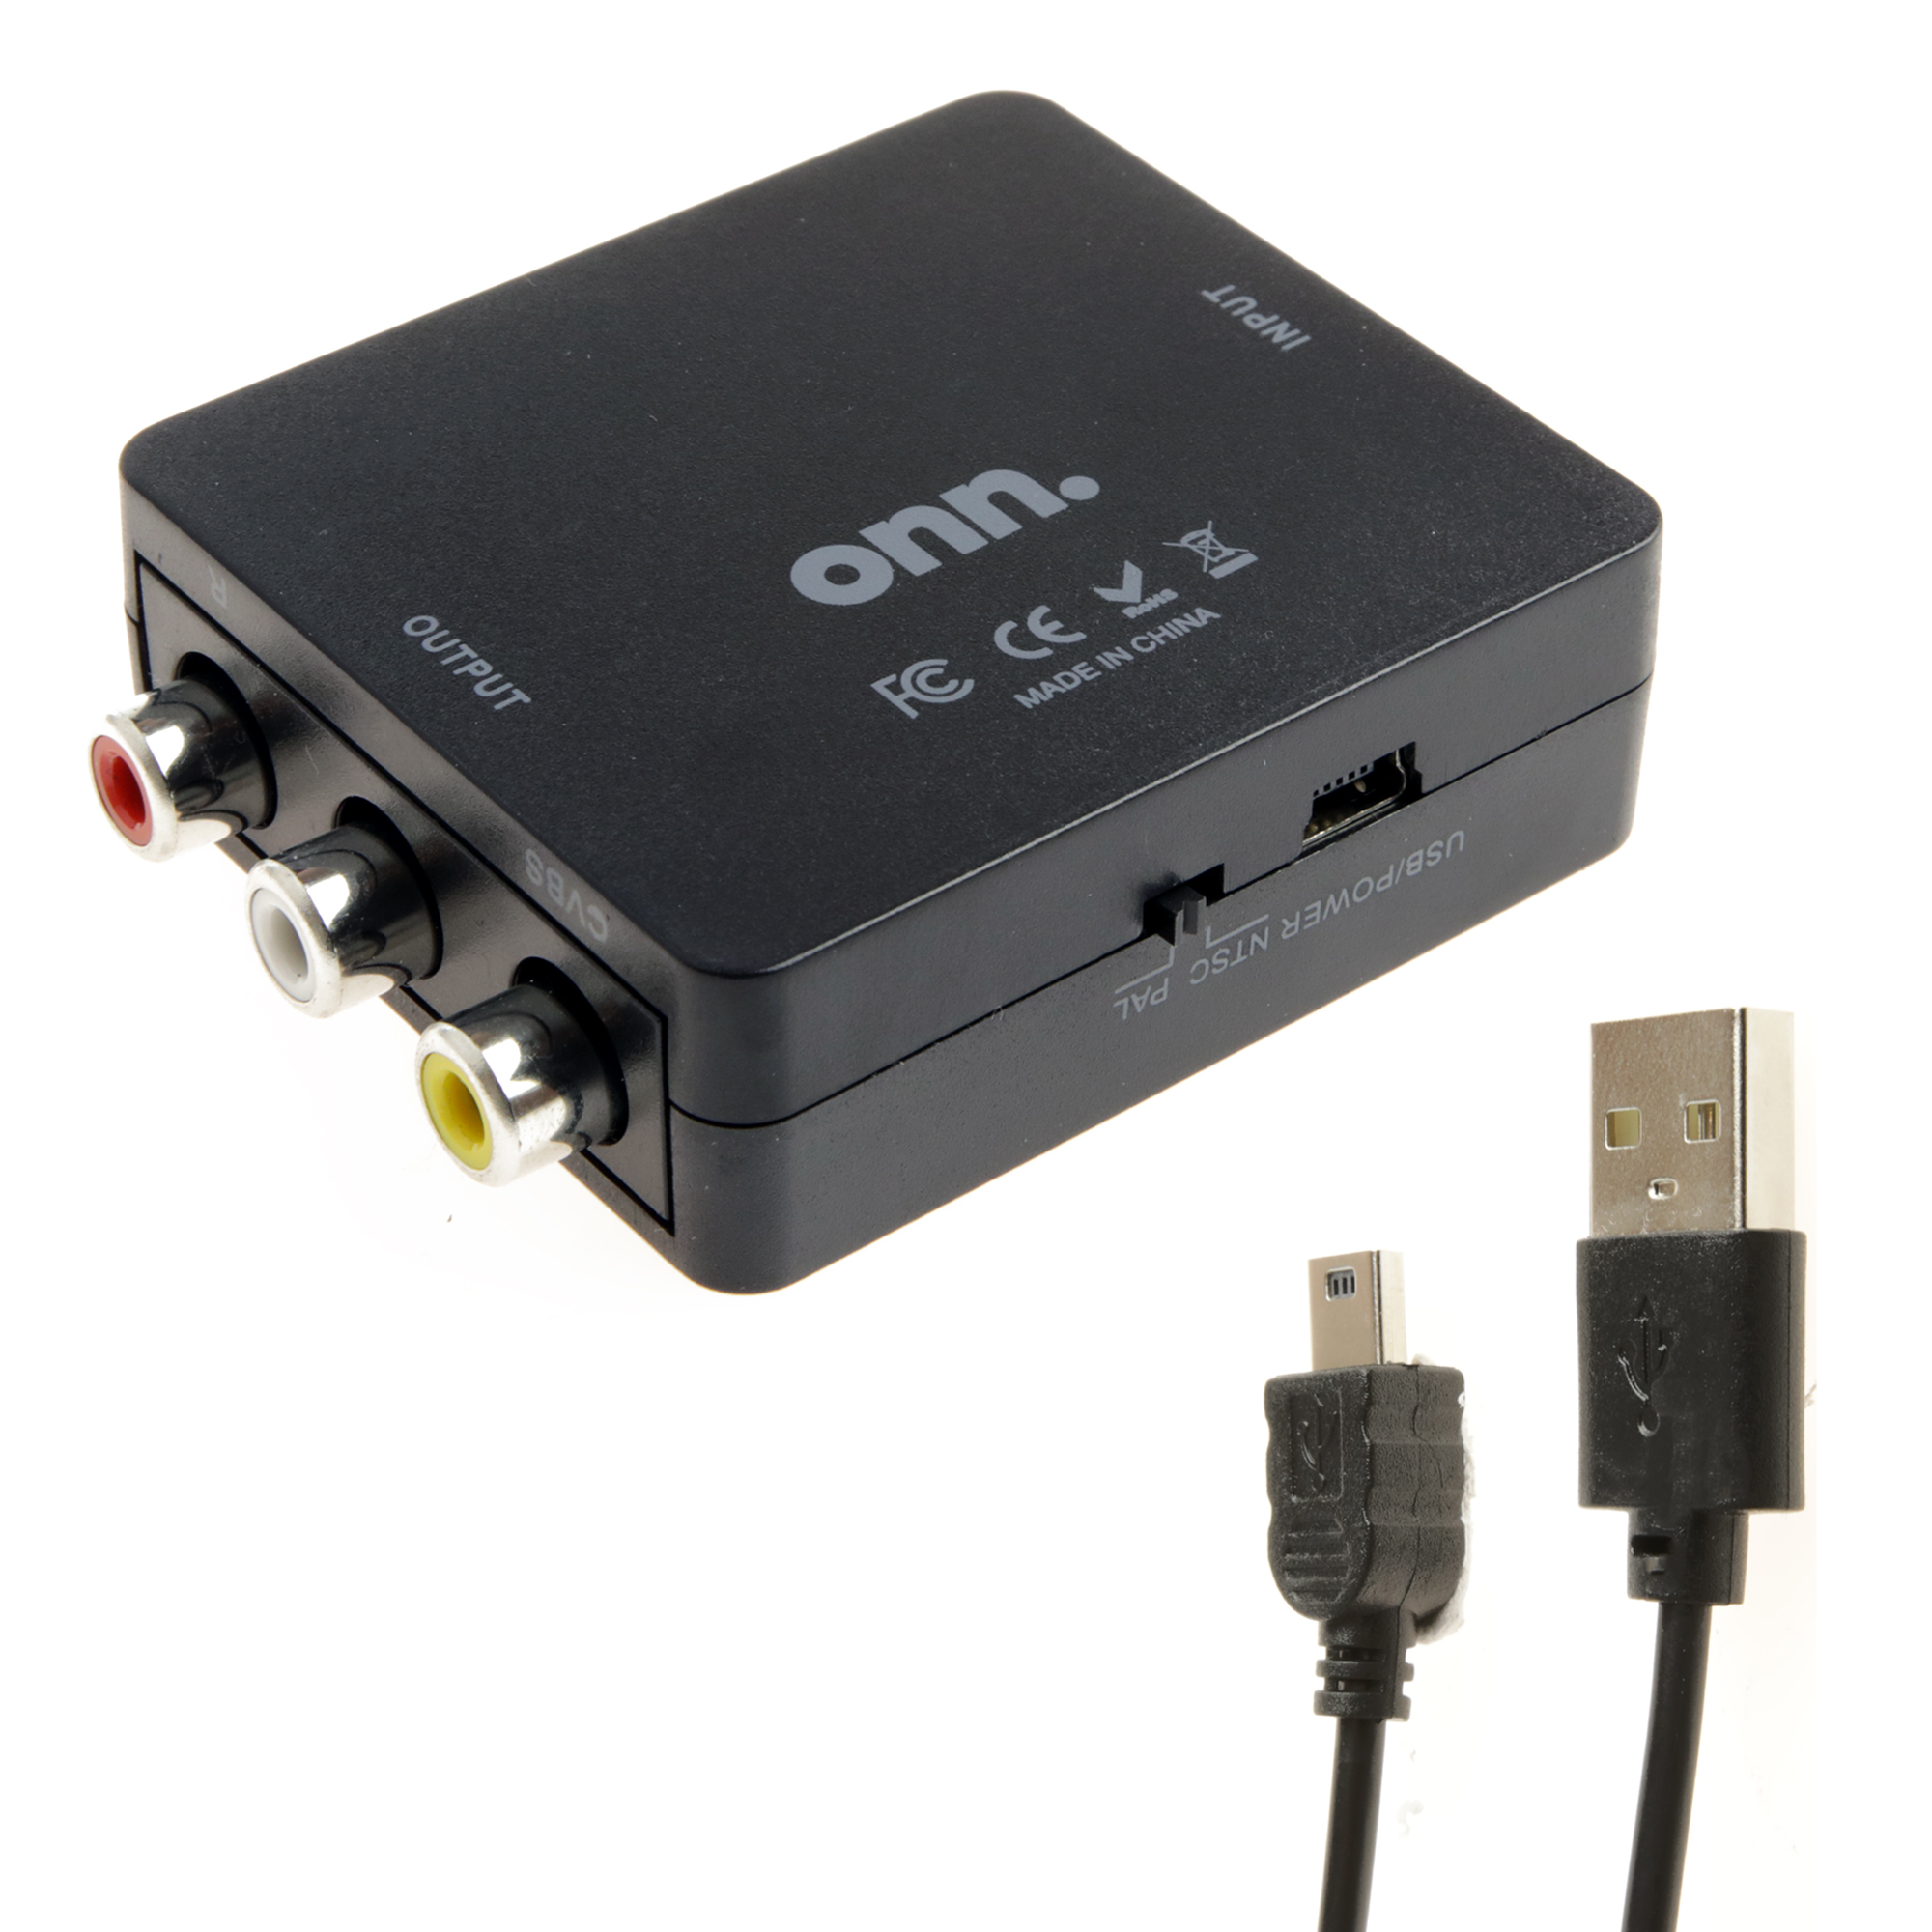 onn. HDMI to Composite AV Adapter, 2.6' Mini-USB Cable, 4.1" USB Wall Adapter, Black, 100008628 - image 4 of 7